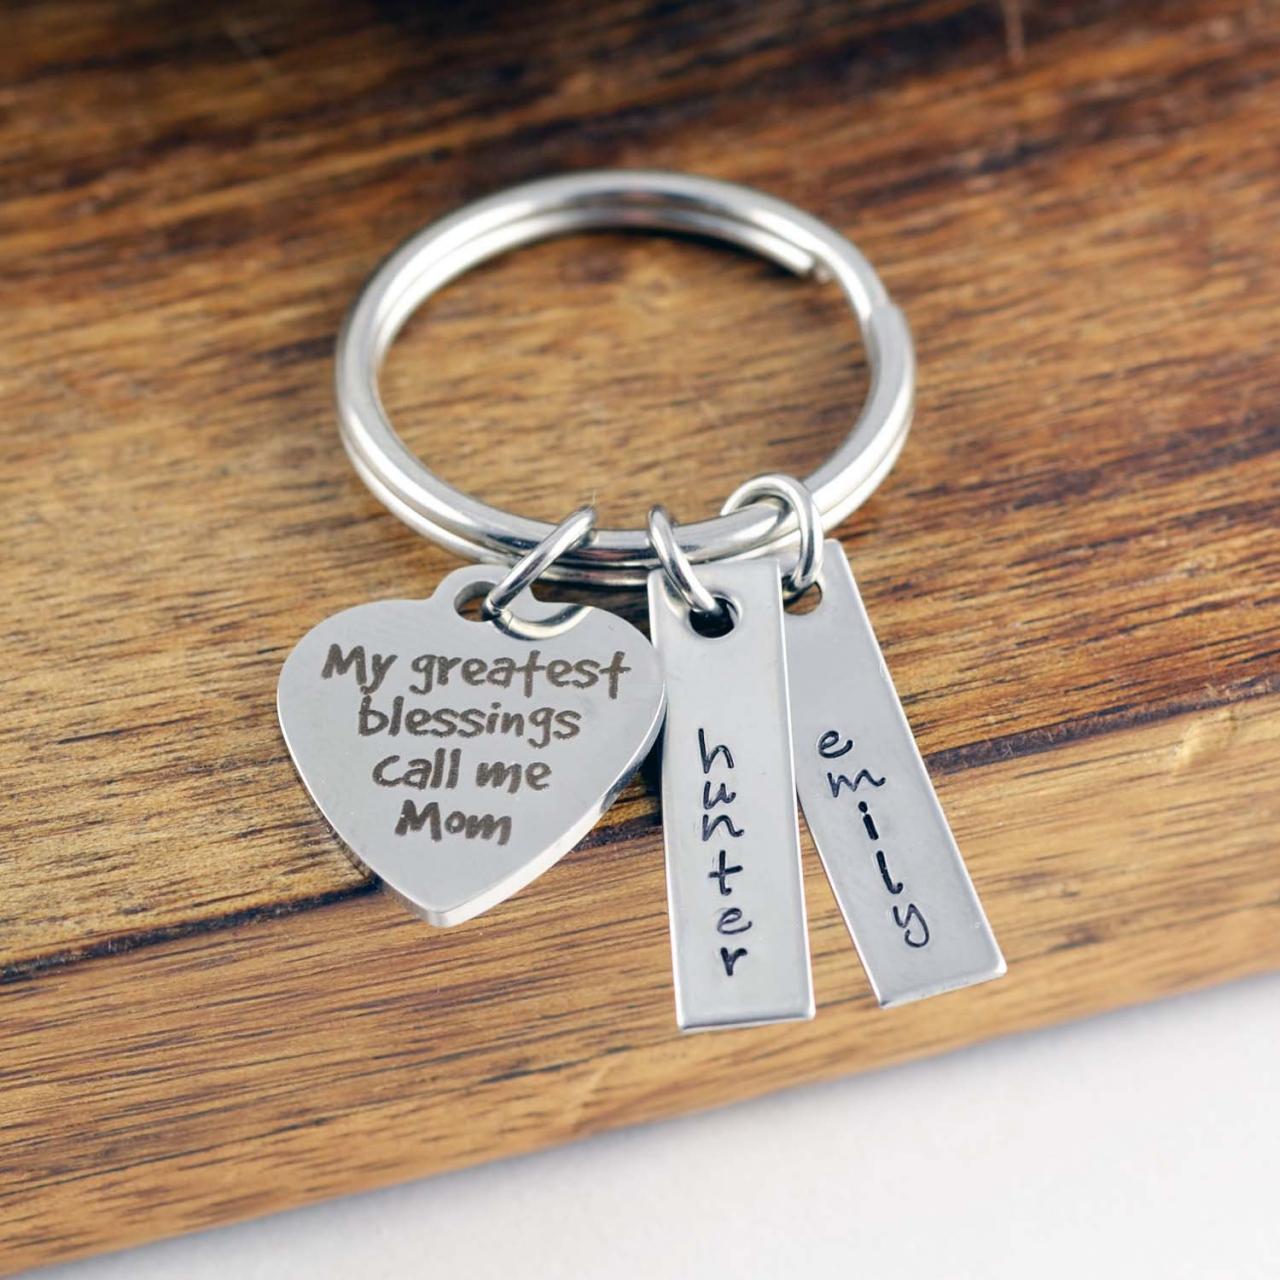 My Greatest Blessings Call Me Mom Keychain, Mothers Jewelry, Mothers Day Gift, Mothers Keychain, Mom Jewelry, Gifts For Mom, Personalized